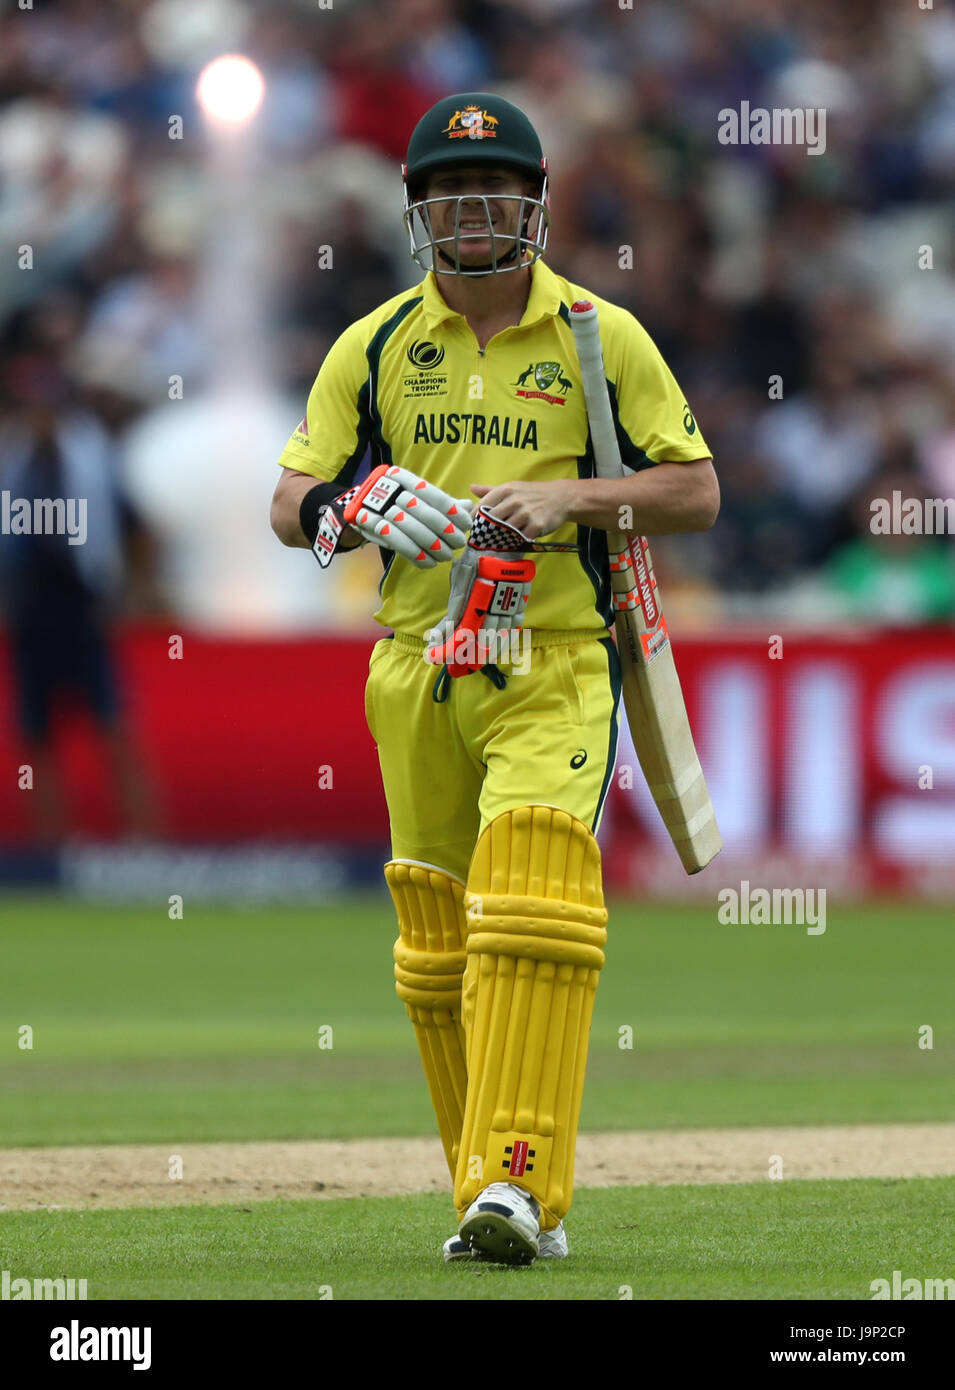 Australia's David Warner walks off after being dismissed by New Zealand's Trent Boult during the ICC Champions Trophy, Group A match at Edgbaston, Birmingham. Stock Photo